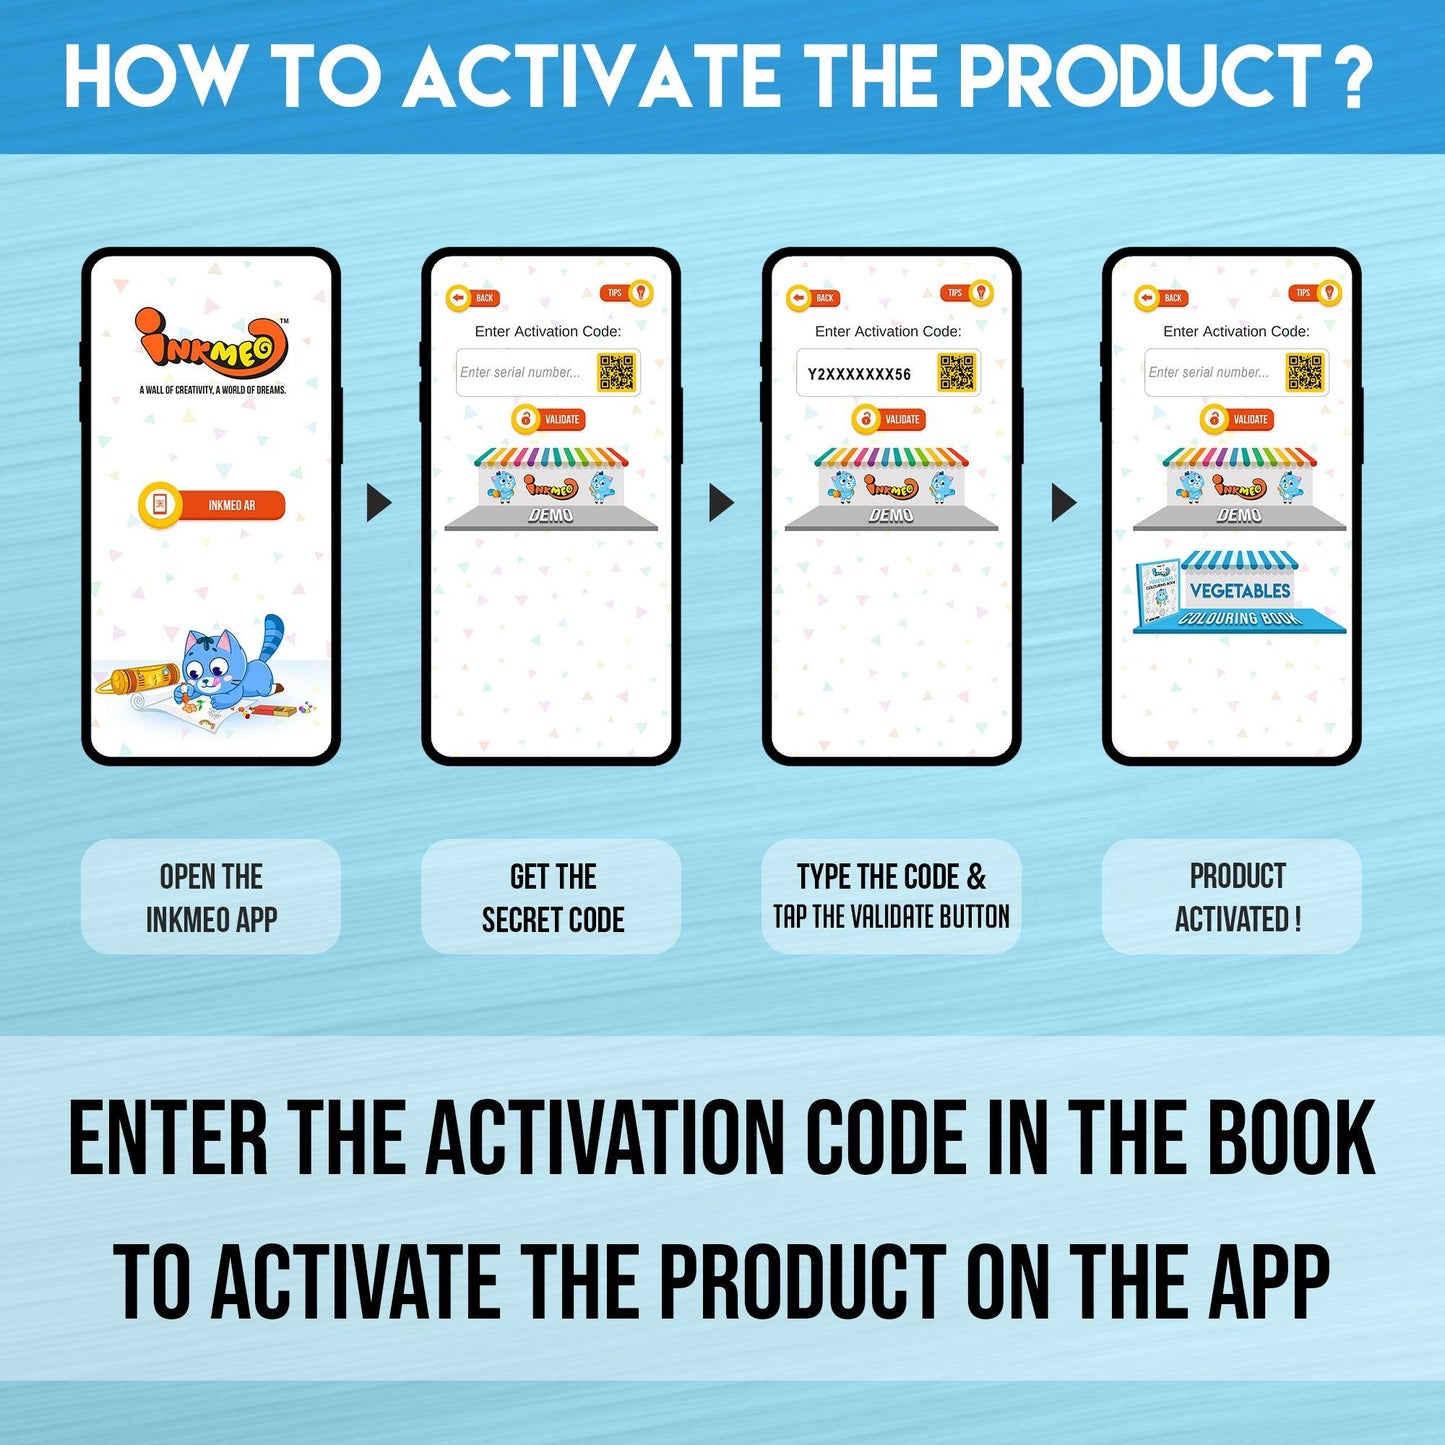 The image displays a blue background with four phones showcasing the message "To access the Inkmeo app, acquire the secret code, input the code, and tap for validation to activate the product.